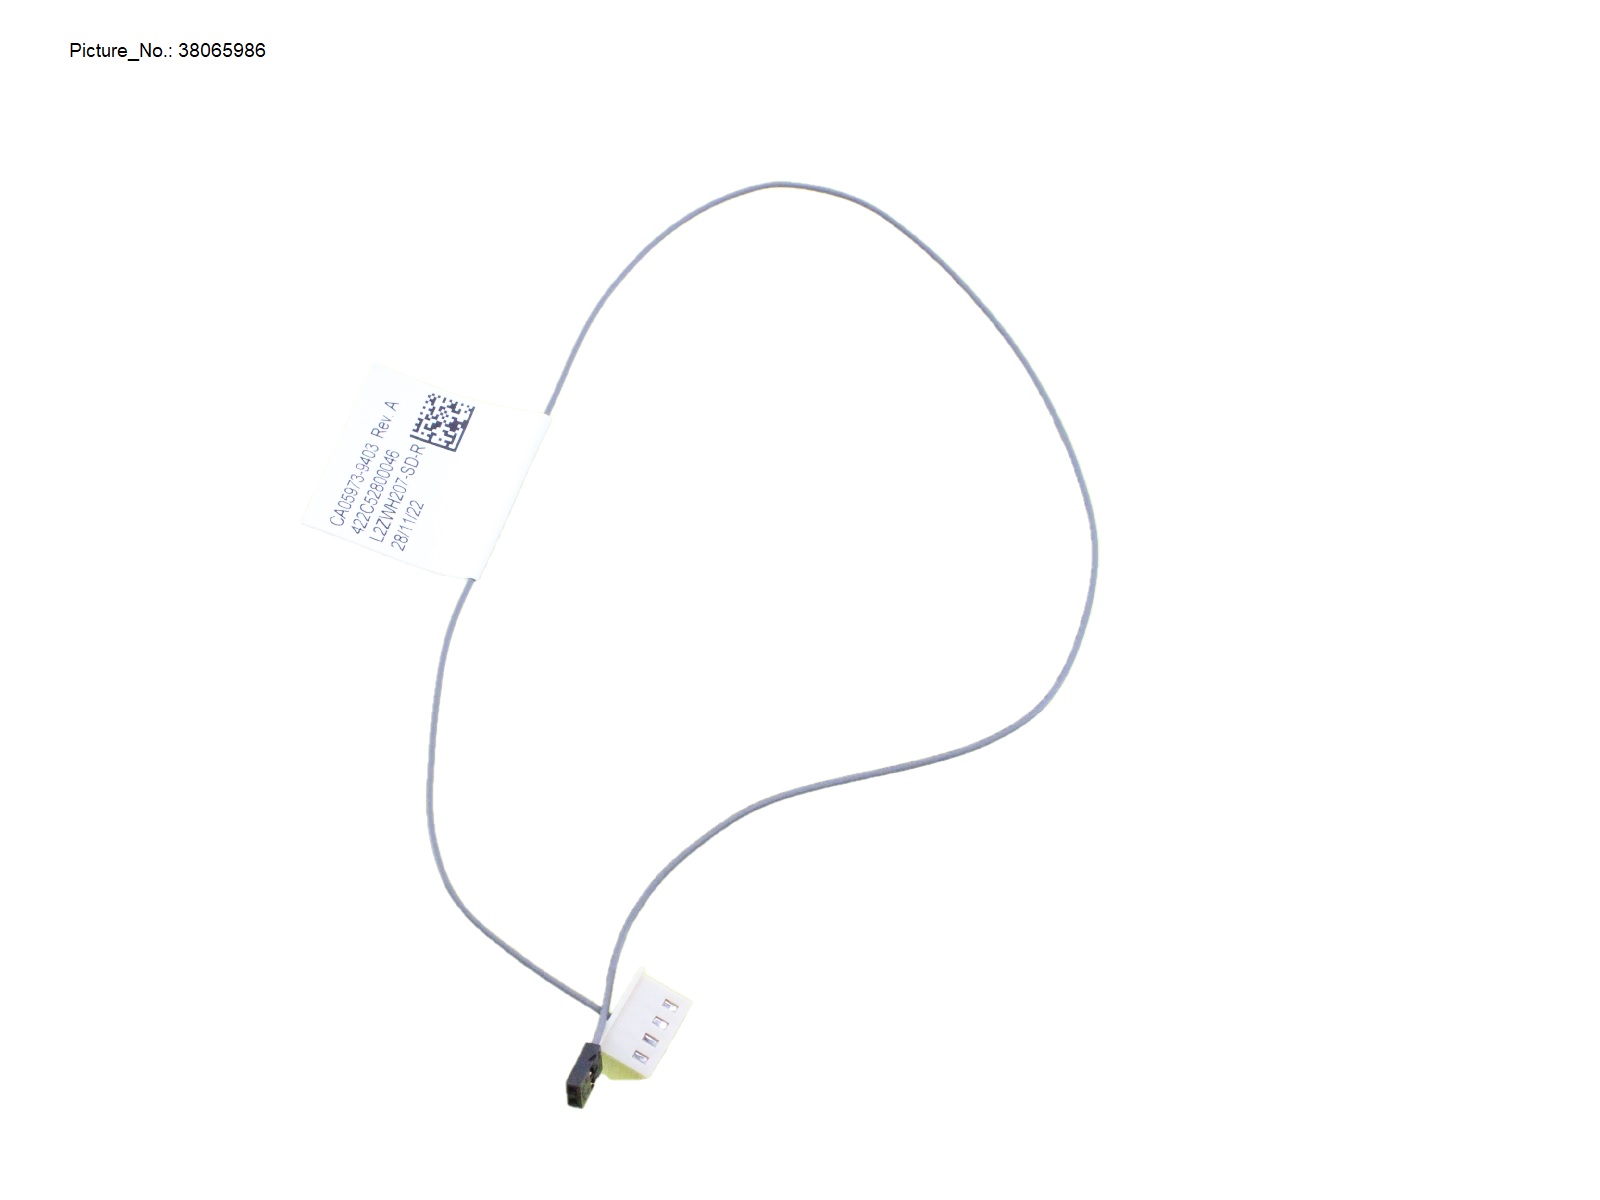 MICROCHIP HDD LED CABLE (350 MM)